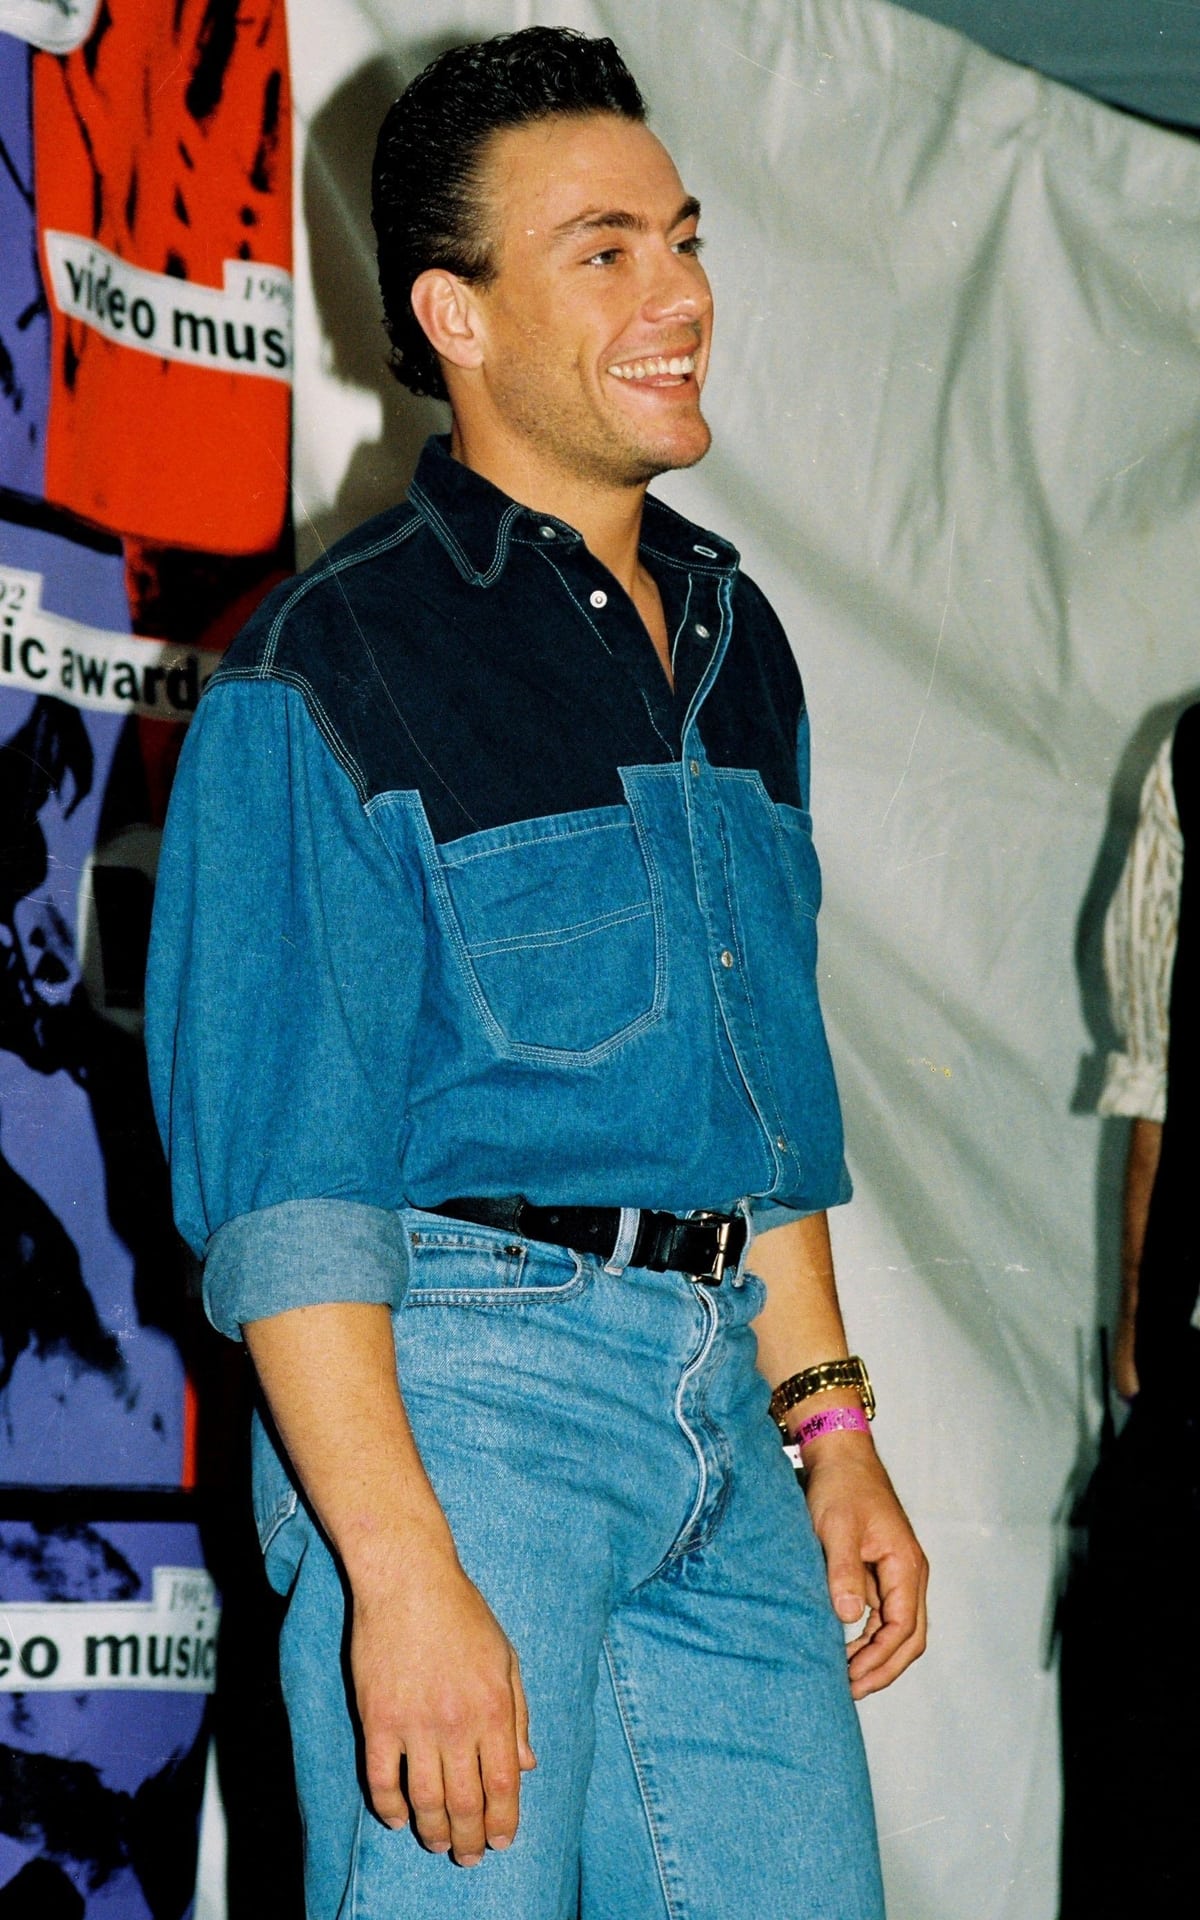 Pictured at the 1992 MTV Movie Awards, Jean-Claude Van Damme was one of the most popular action stars in the 1990s